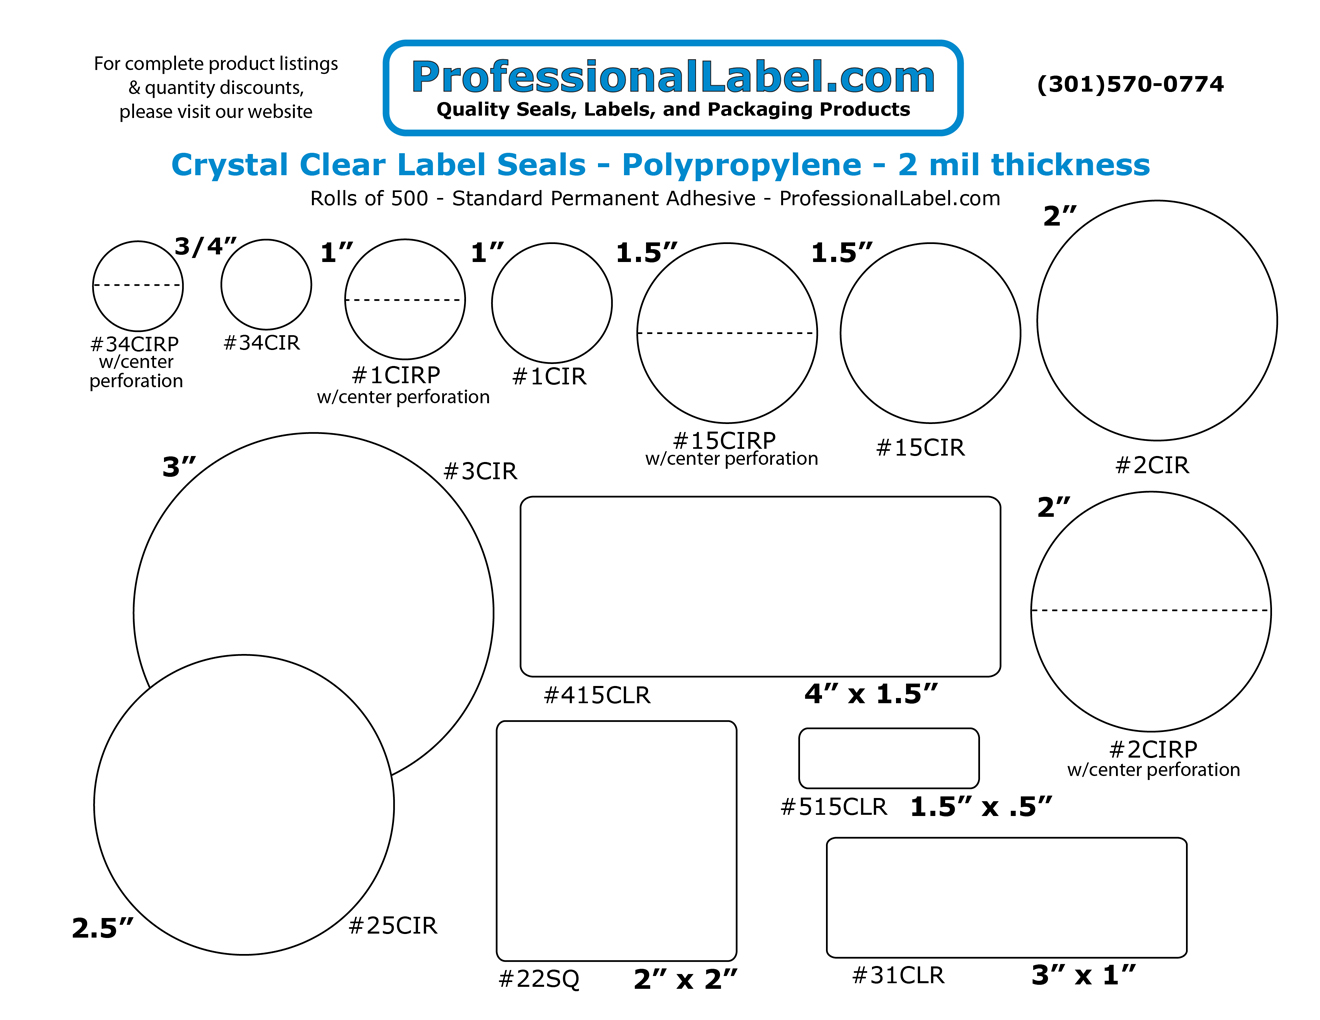 Crystal Clear Round 2.5" Labels on Roll of 500 Standard Permanent Adhesive 25CIR 